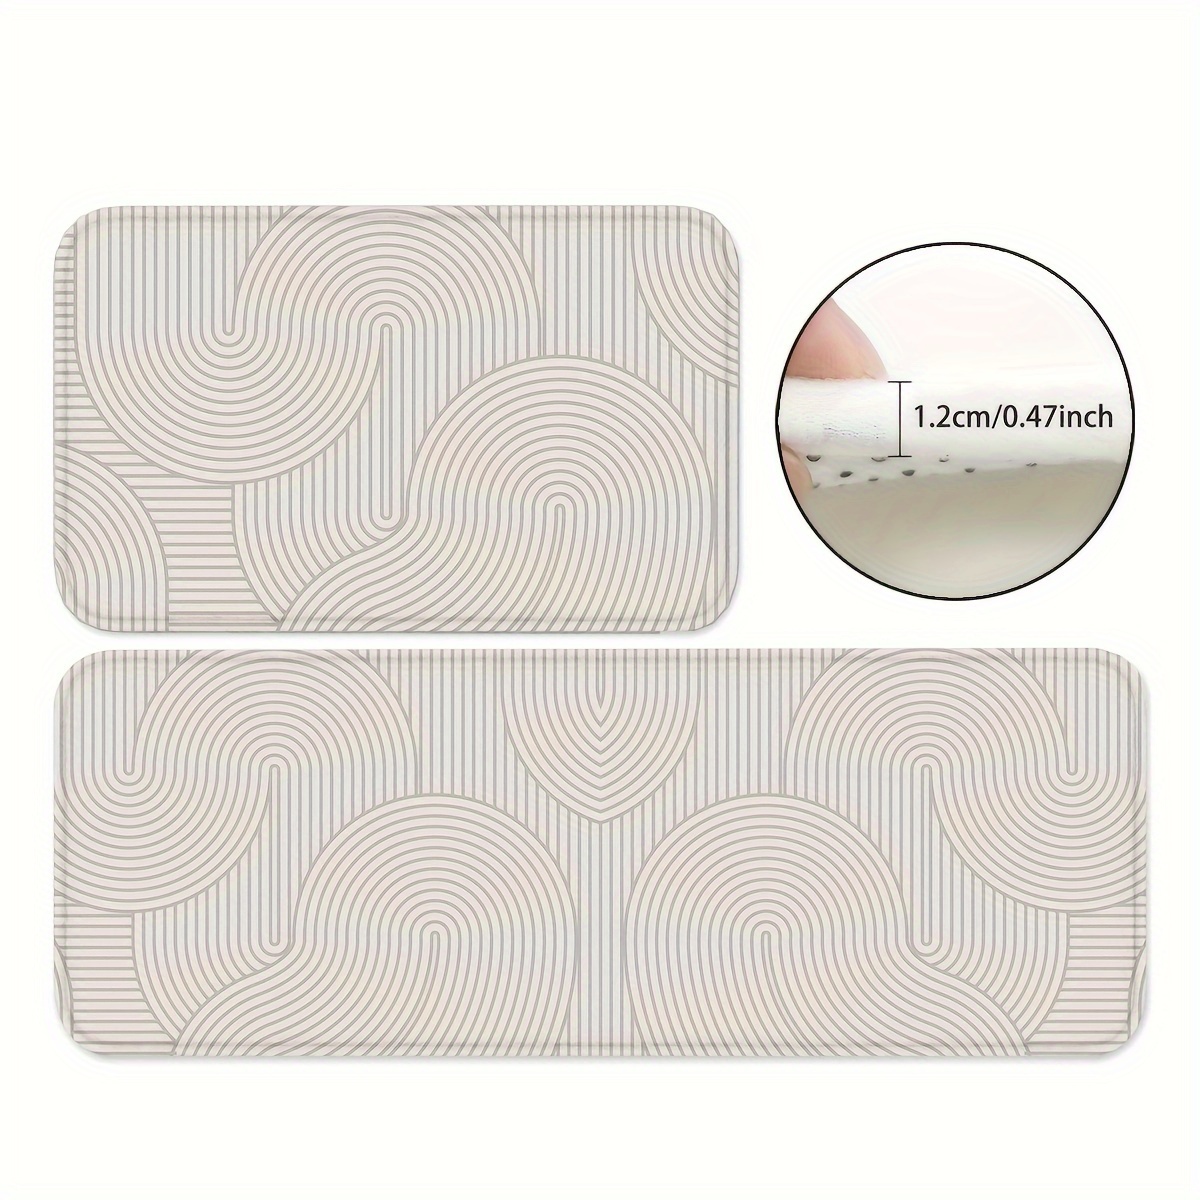 

1/2pcs, Area Rug, Nordic Style Kitchen Mats, Non-slip And Durable Bathroom Pads, Comfortable Standing Runner Rugs, Carpets For Kitchen, Home, Office, Sink, Laundry Room, Bathroom, Spring Decor